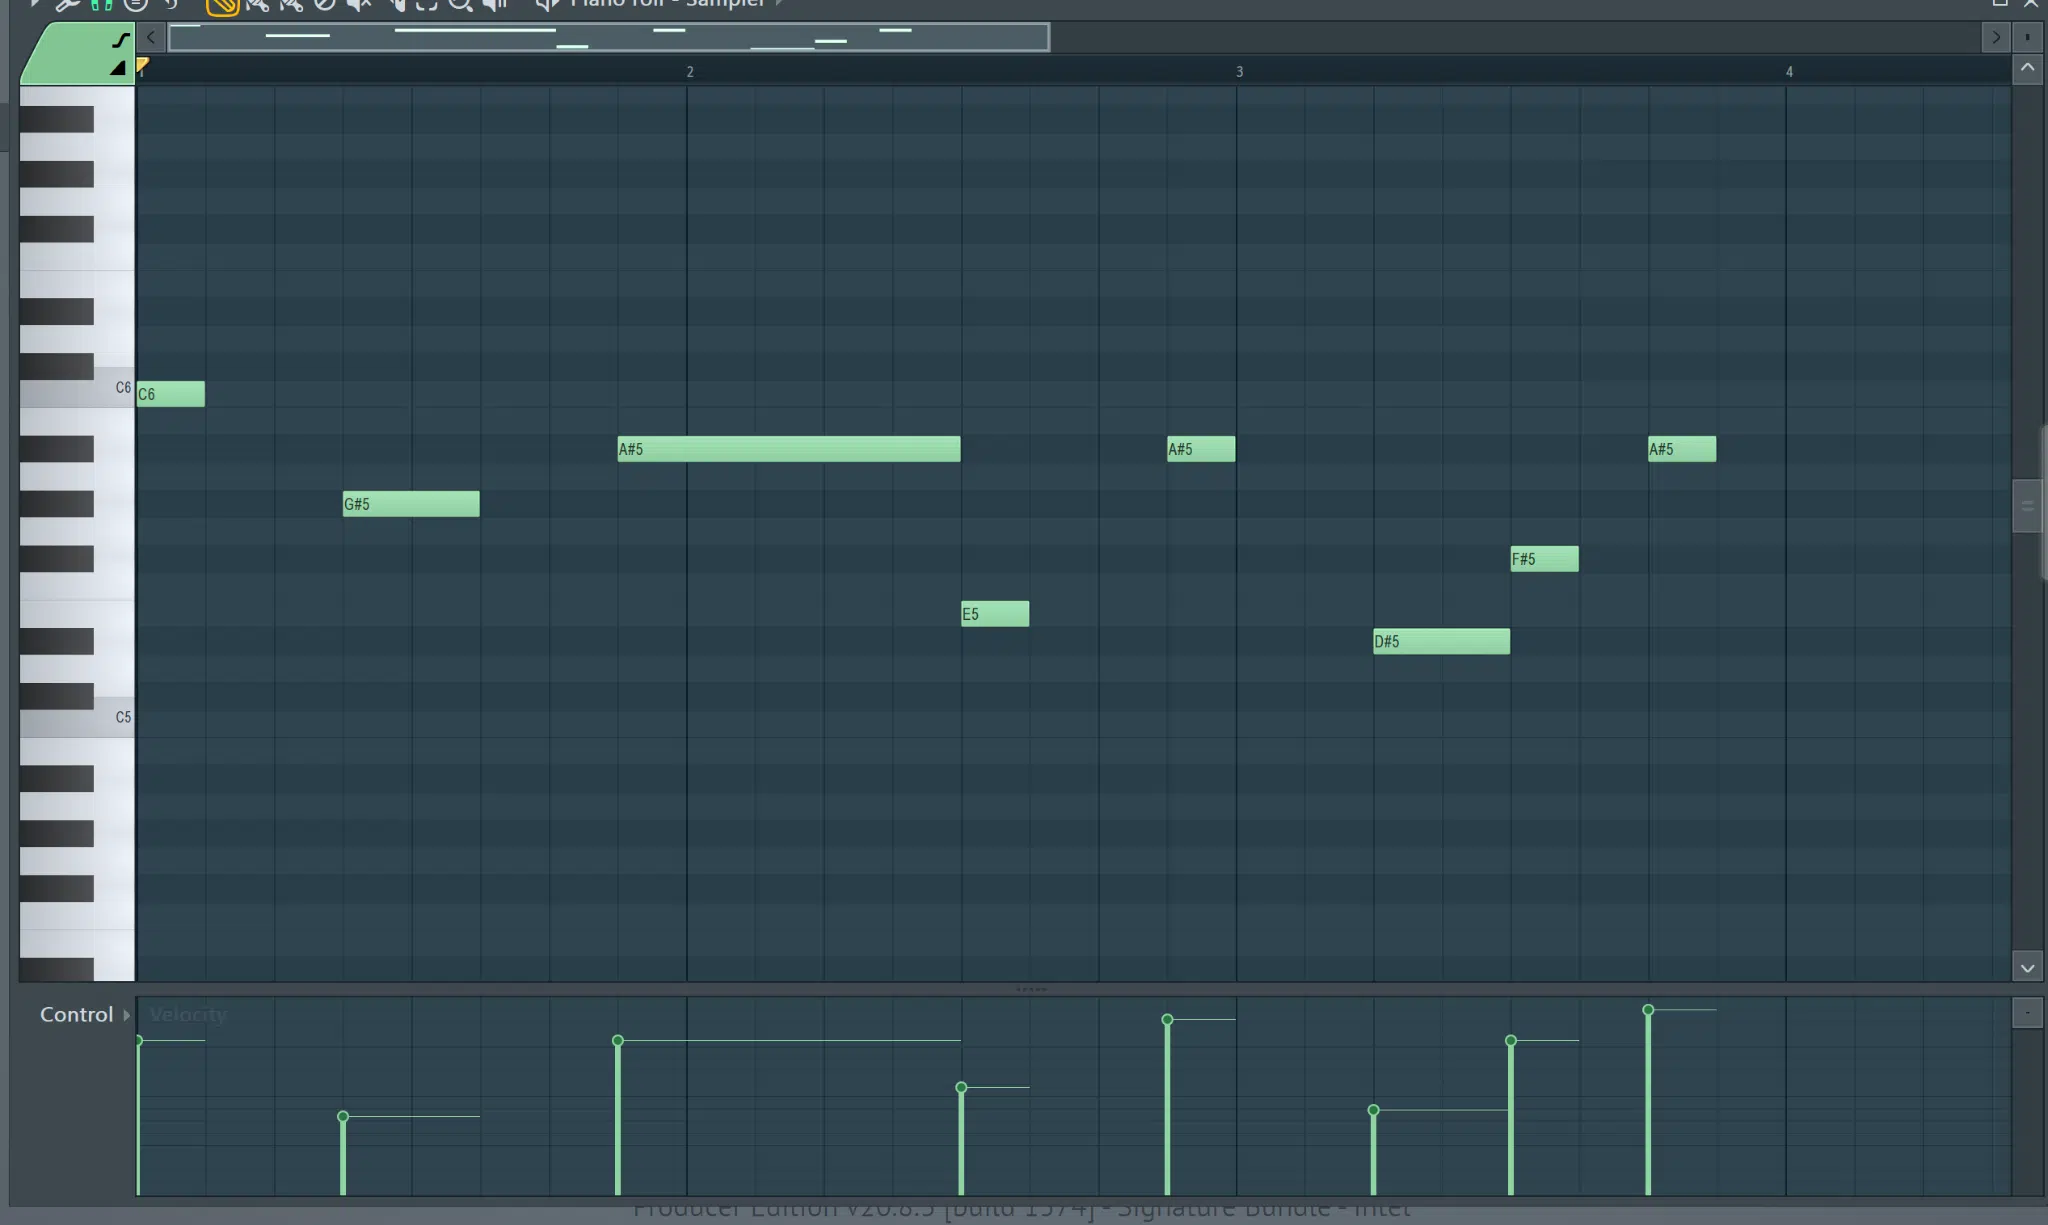 You can see the MIDI data clearly